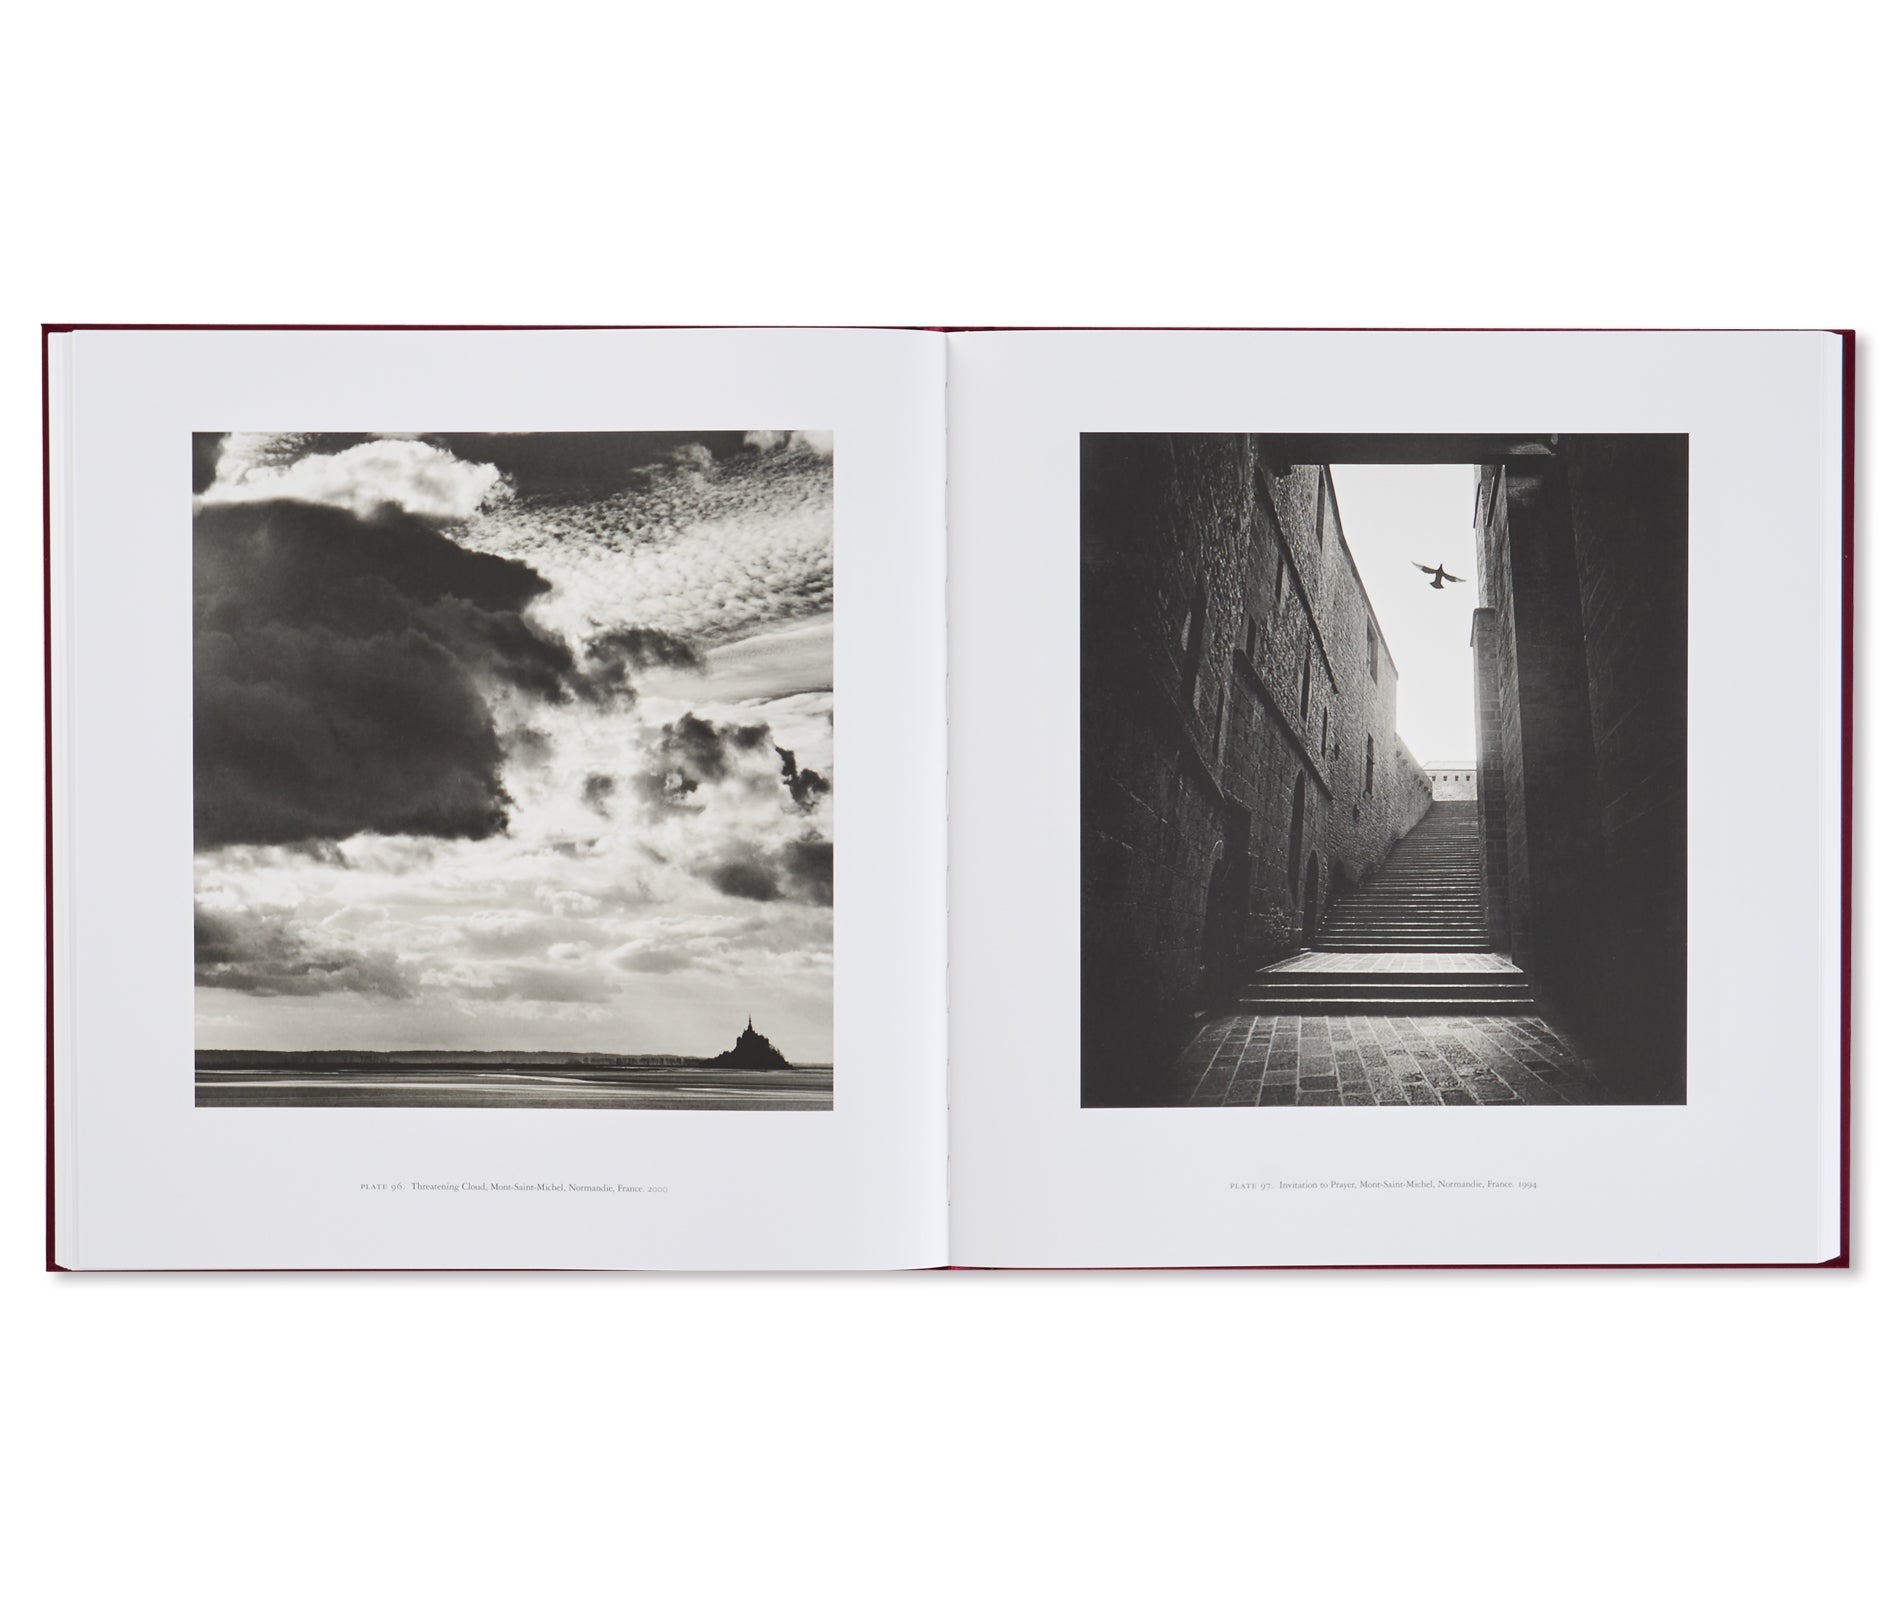 FRANCE by Michael Kenna [SPECIAL EDITION] – twelvebooks